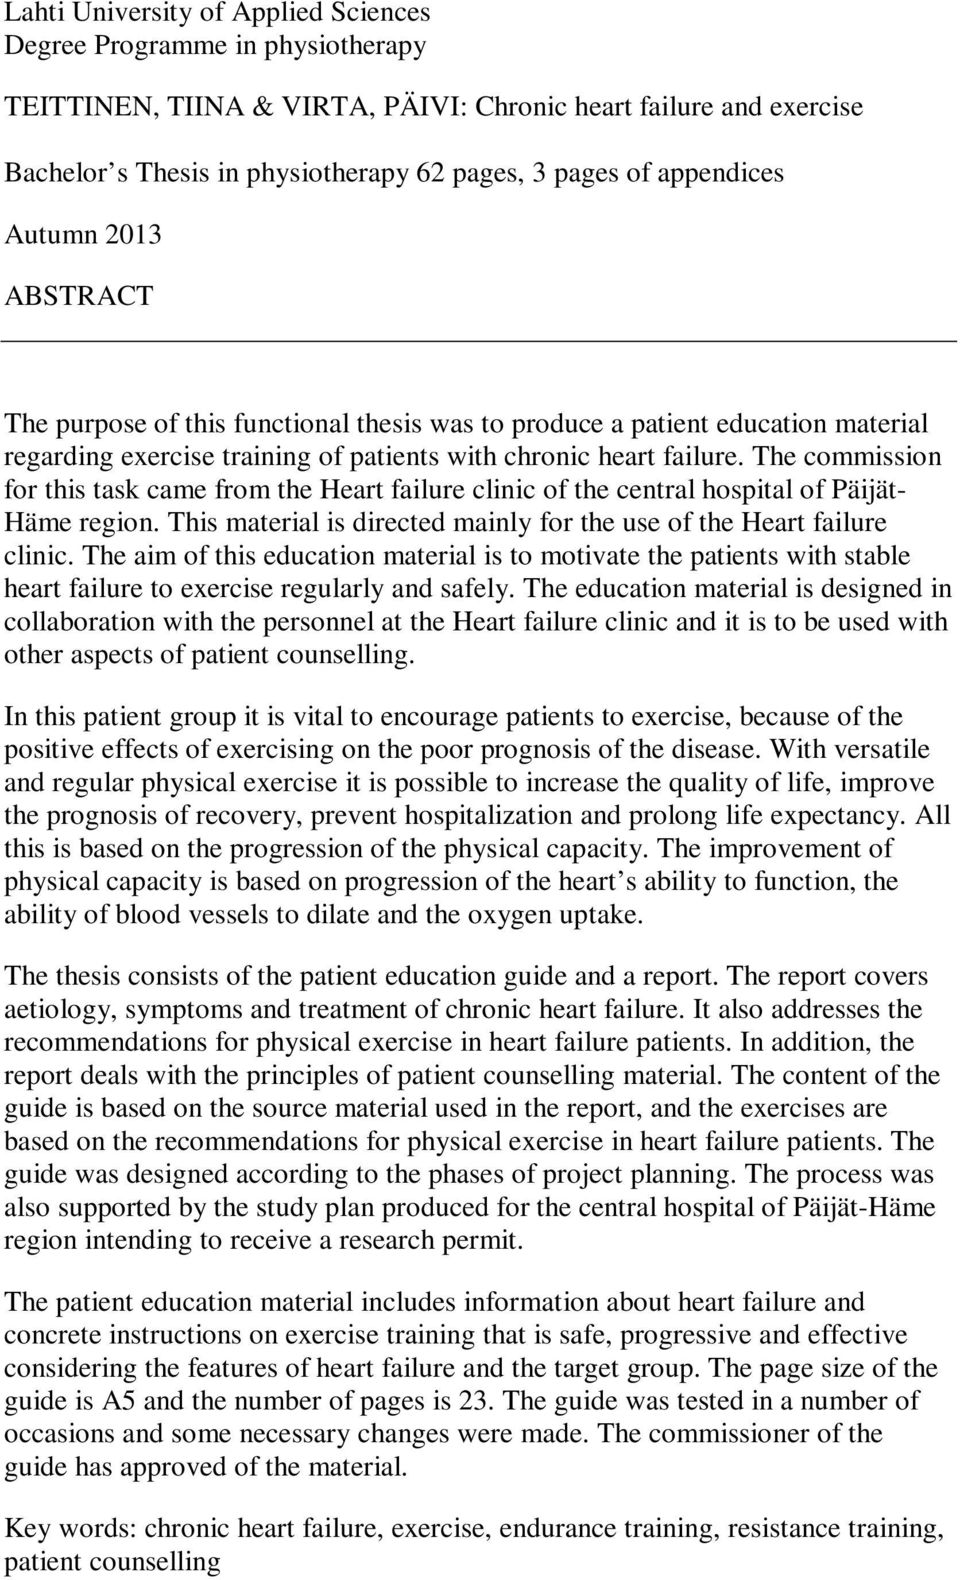 The commission for this task came from the Heart failure clinic of the central hospital of Päijät- Häme region. This material is directed mainly for the use of the Heart failure clinic.